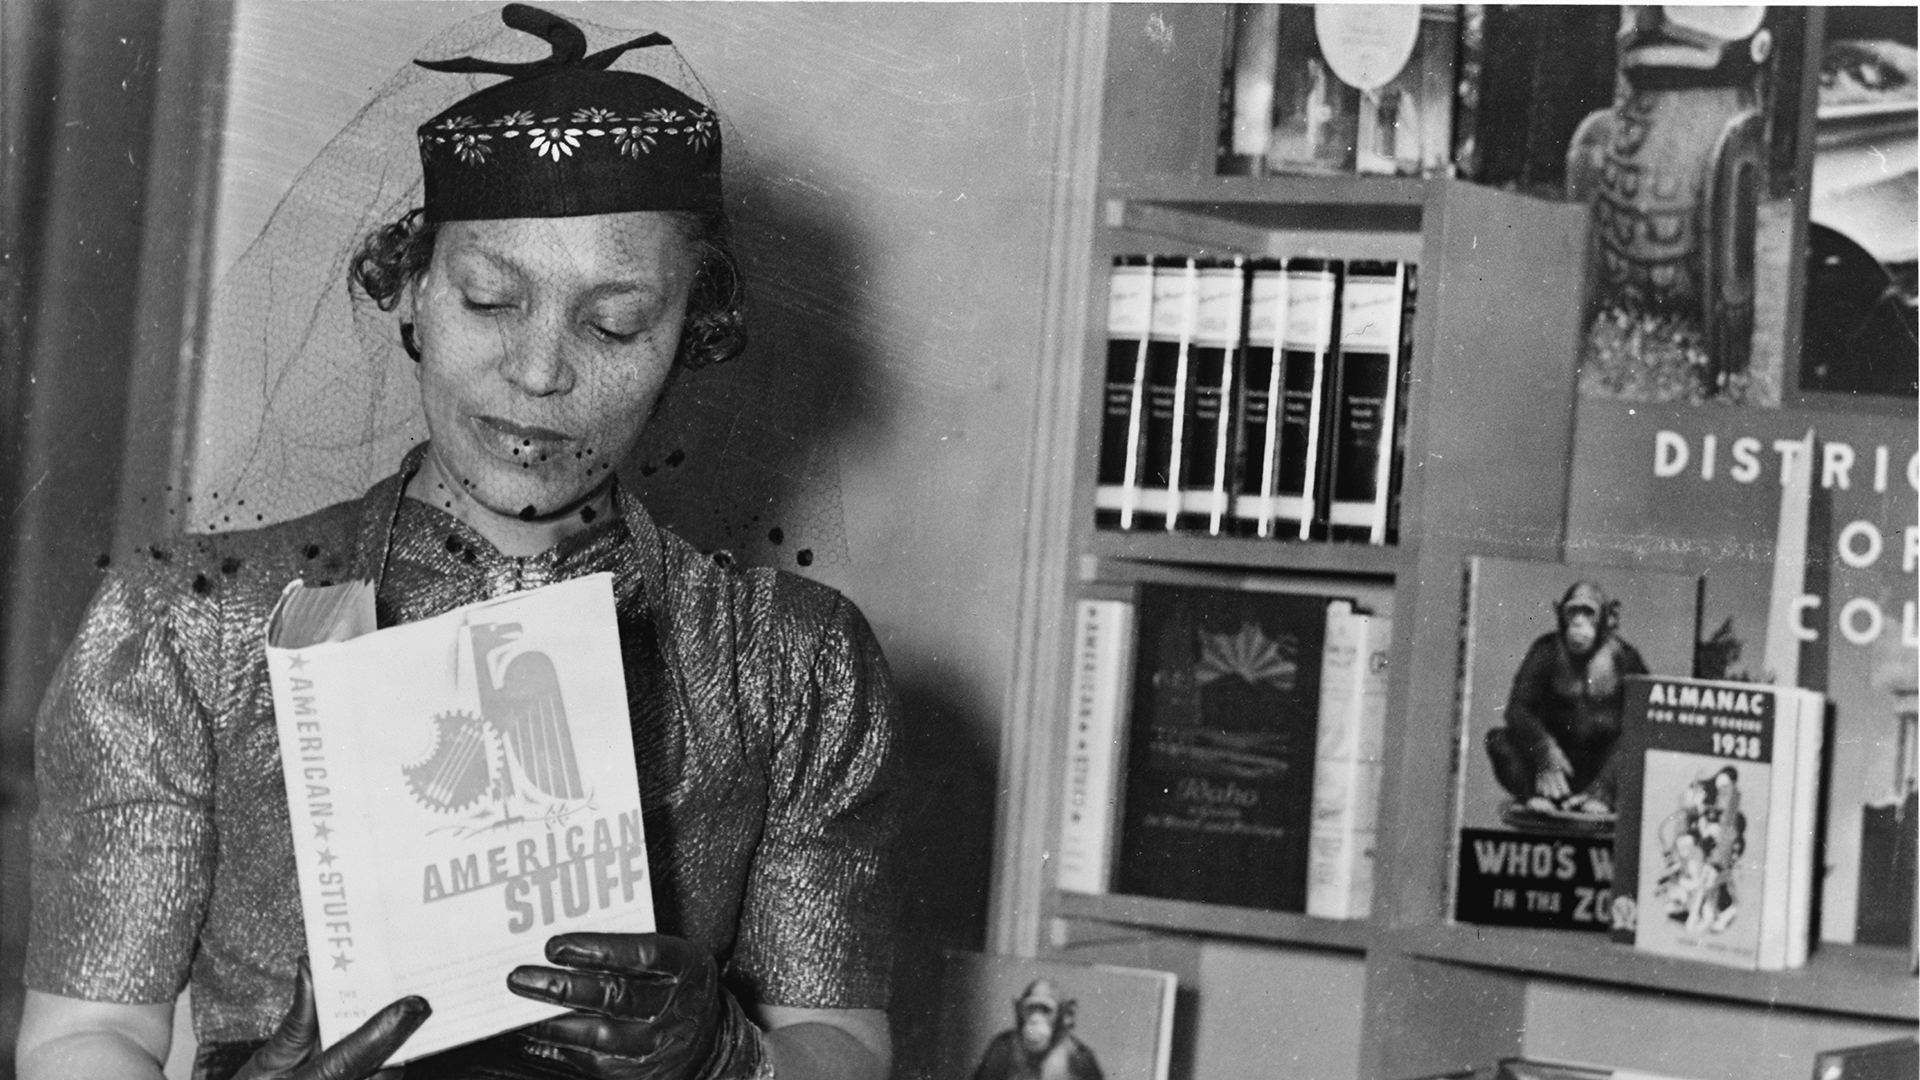 September 18, 1937: Zora Neale Hurston’s “Their Eyes Were Watching God” Was Published